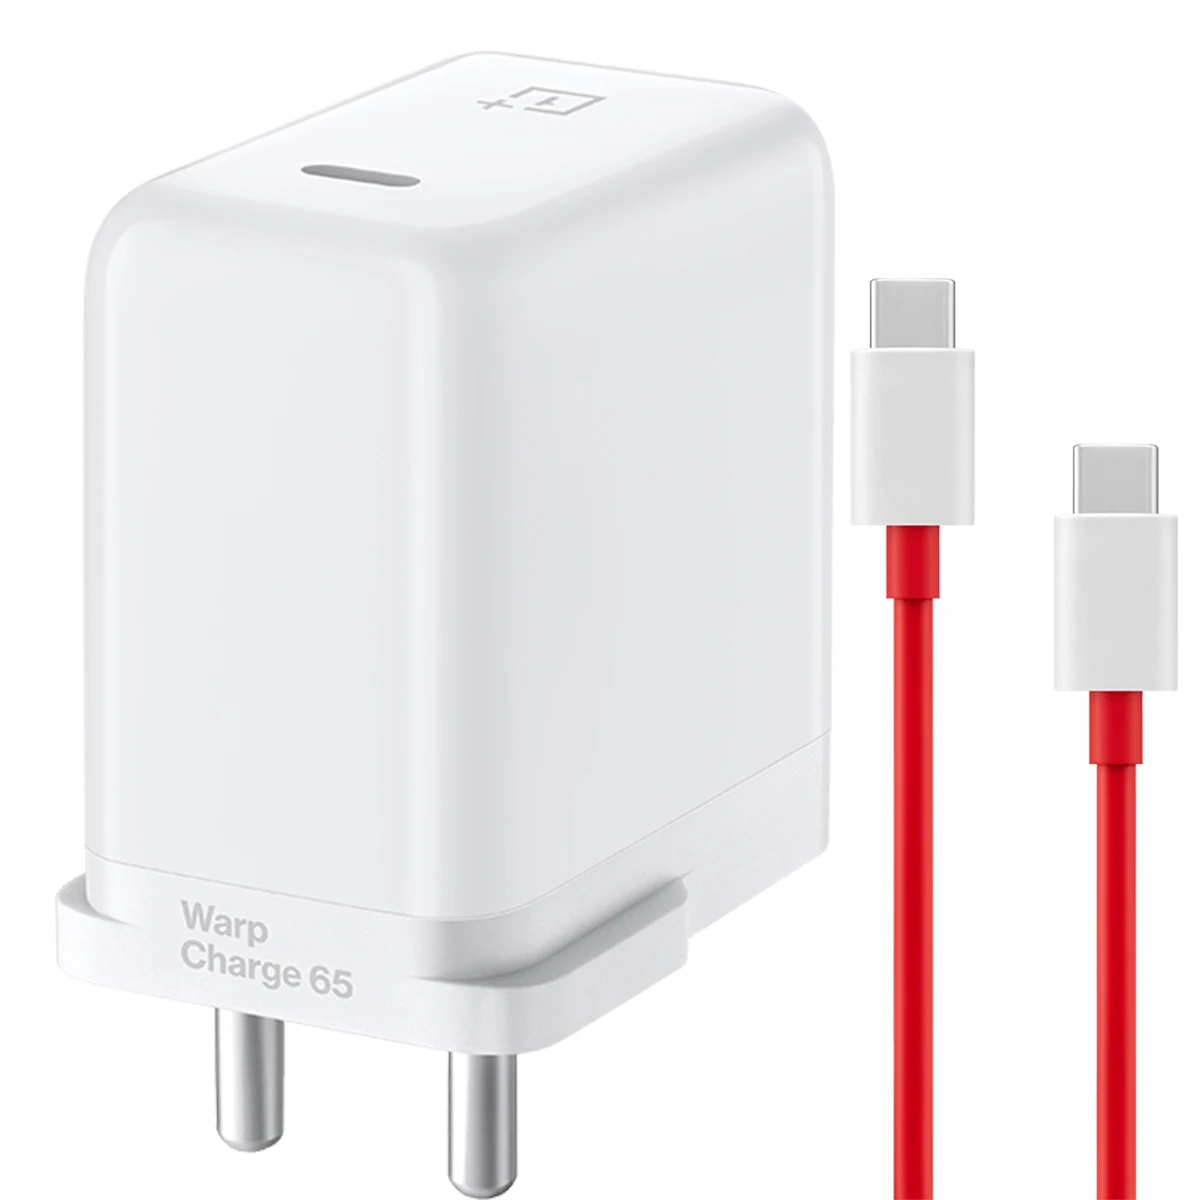 Moeras struik Inzichtelijk Oem In Us Oneplus Warp 65power Adapter Charger Type-c 10v 6.5a 65w Support  Pdo Pps 45w For One Plus 8t 8pro - Buy Warp Charge Type-c To Type-c Power  Adapter,Oneplus 8t Power